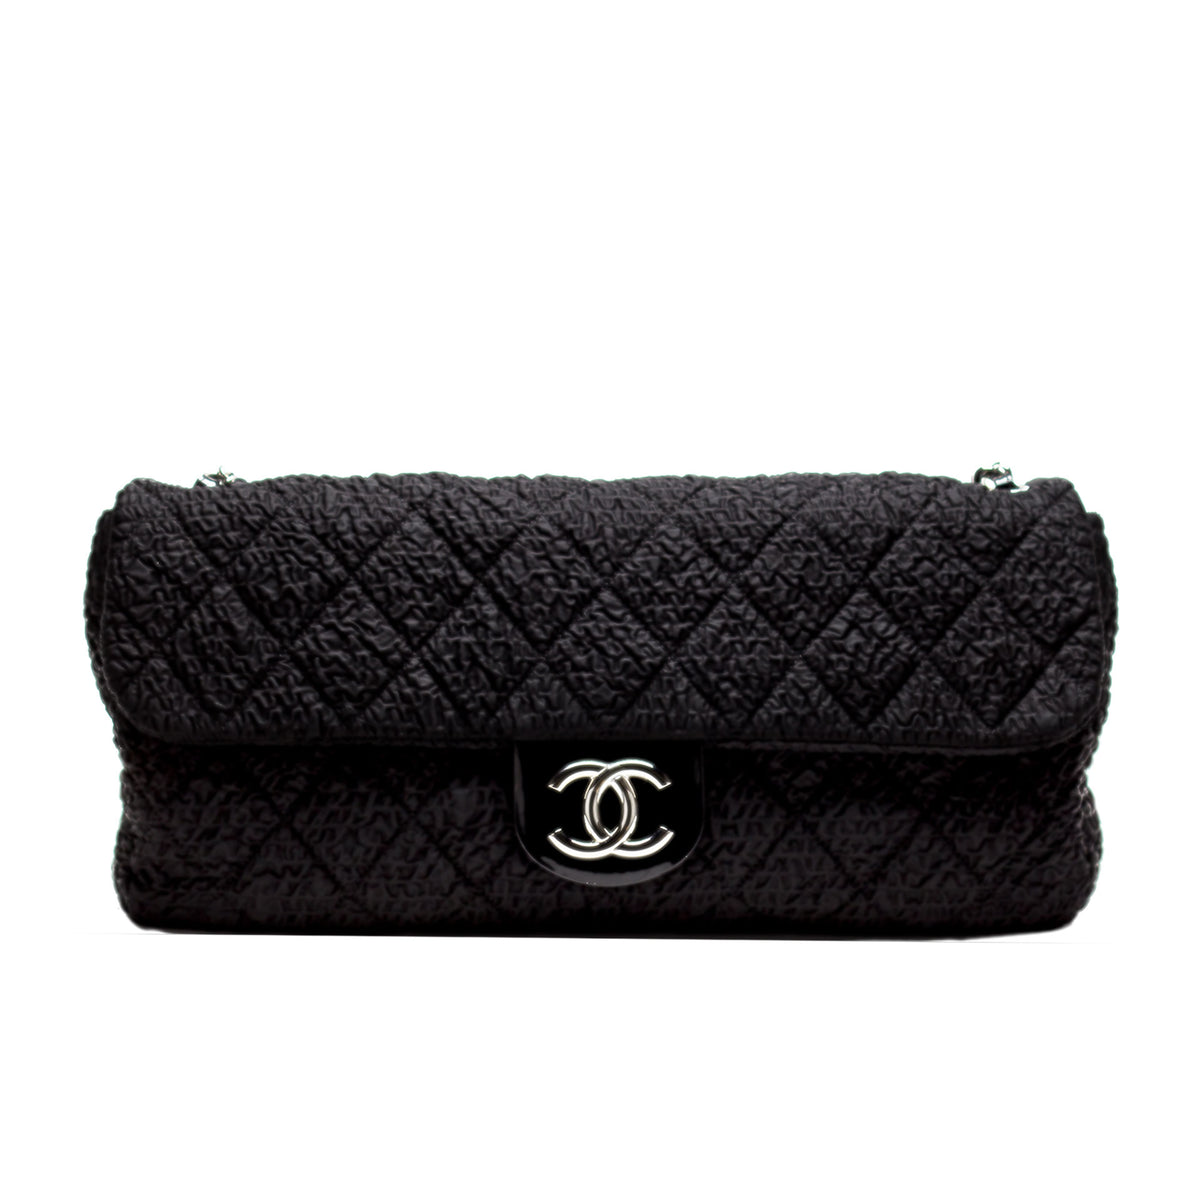 Chanel Microfiber Turquoise Classic Flap Bag – House of Carver